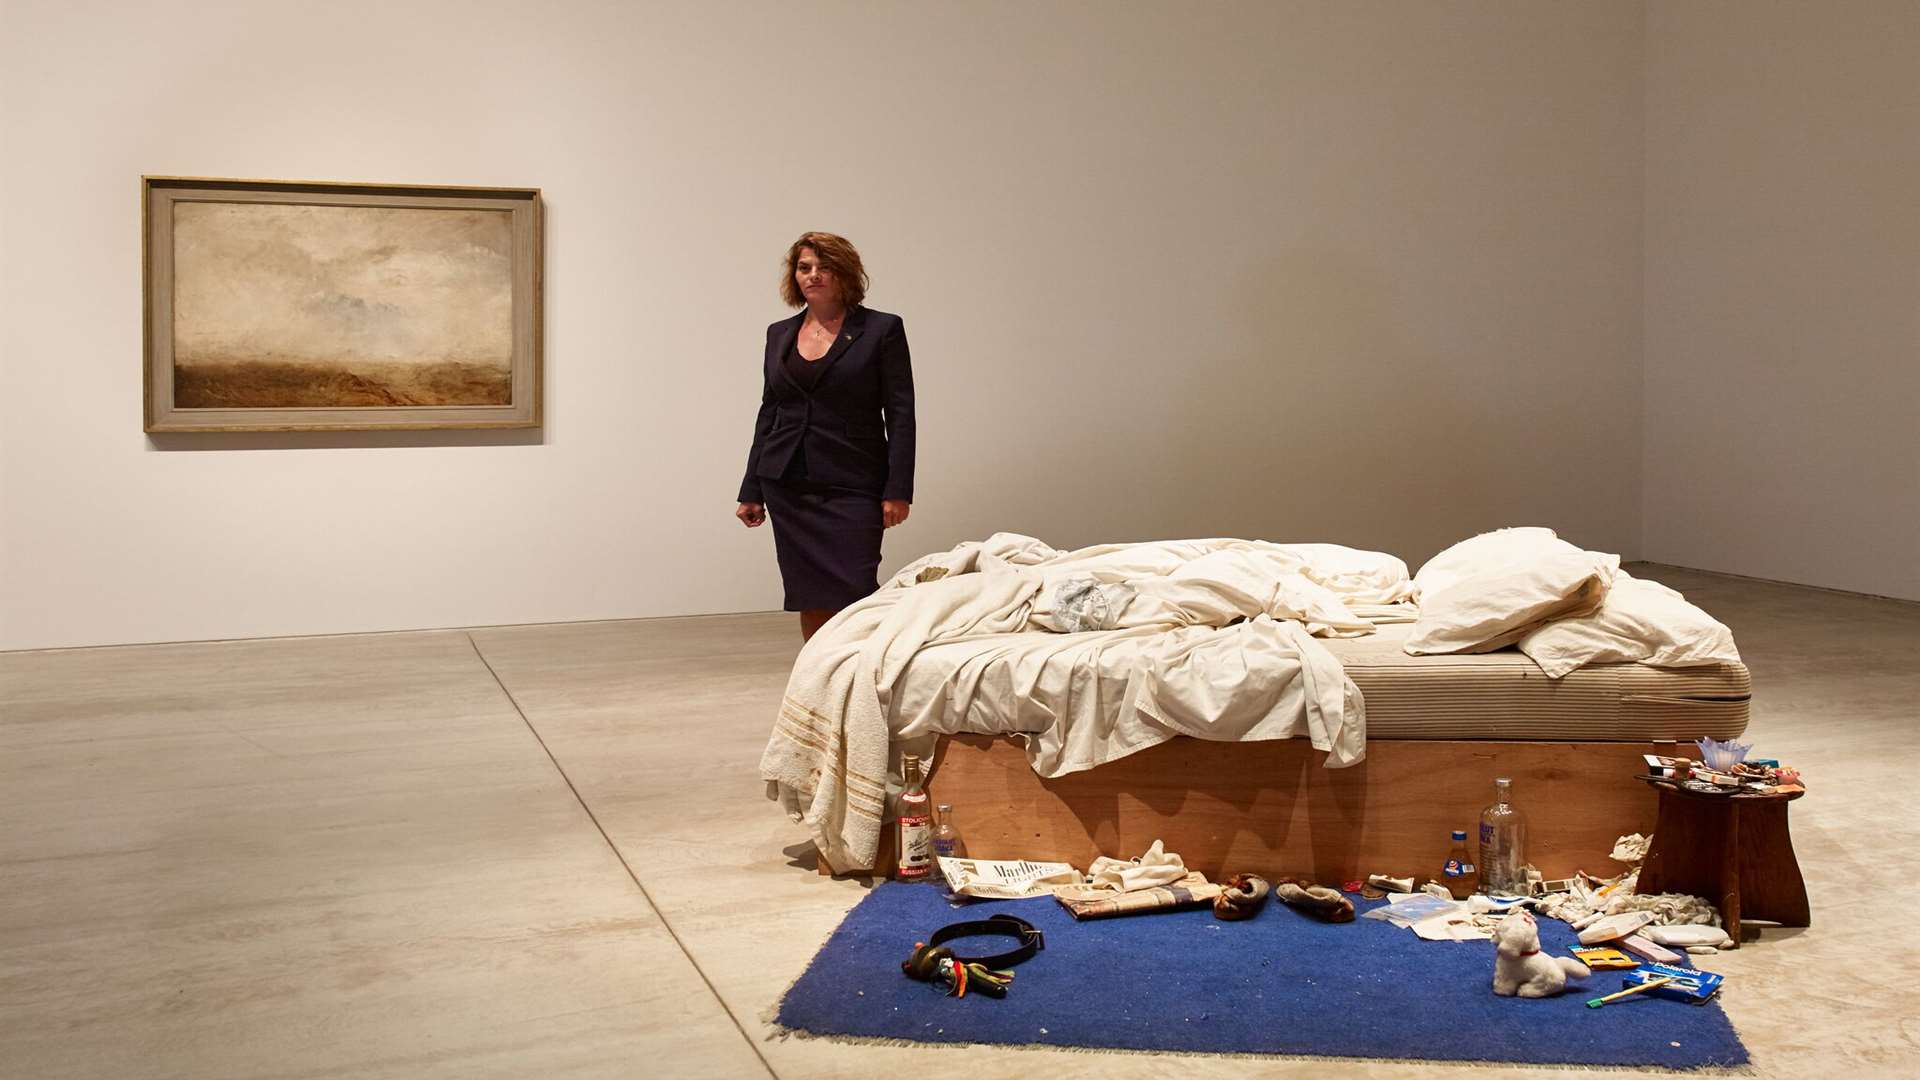 Tracey Emin at her exhibition Tracey Emin ‘My Bed’/JMW Turner. Photo: Stephen White, courtesy Turner Contemporary